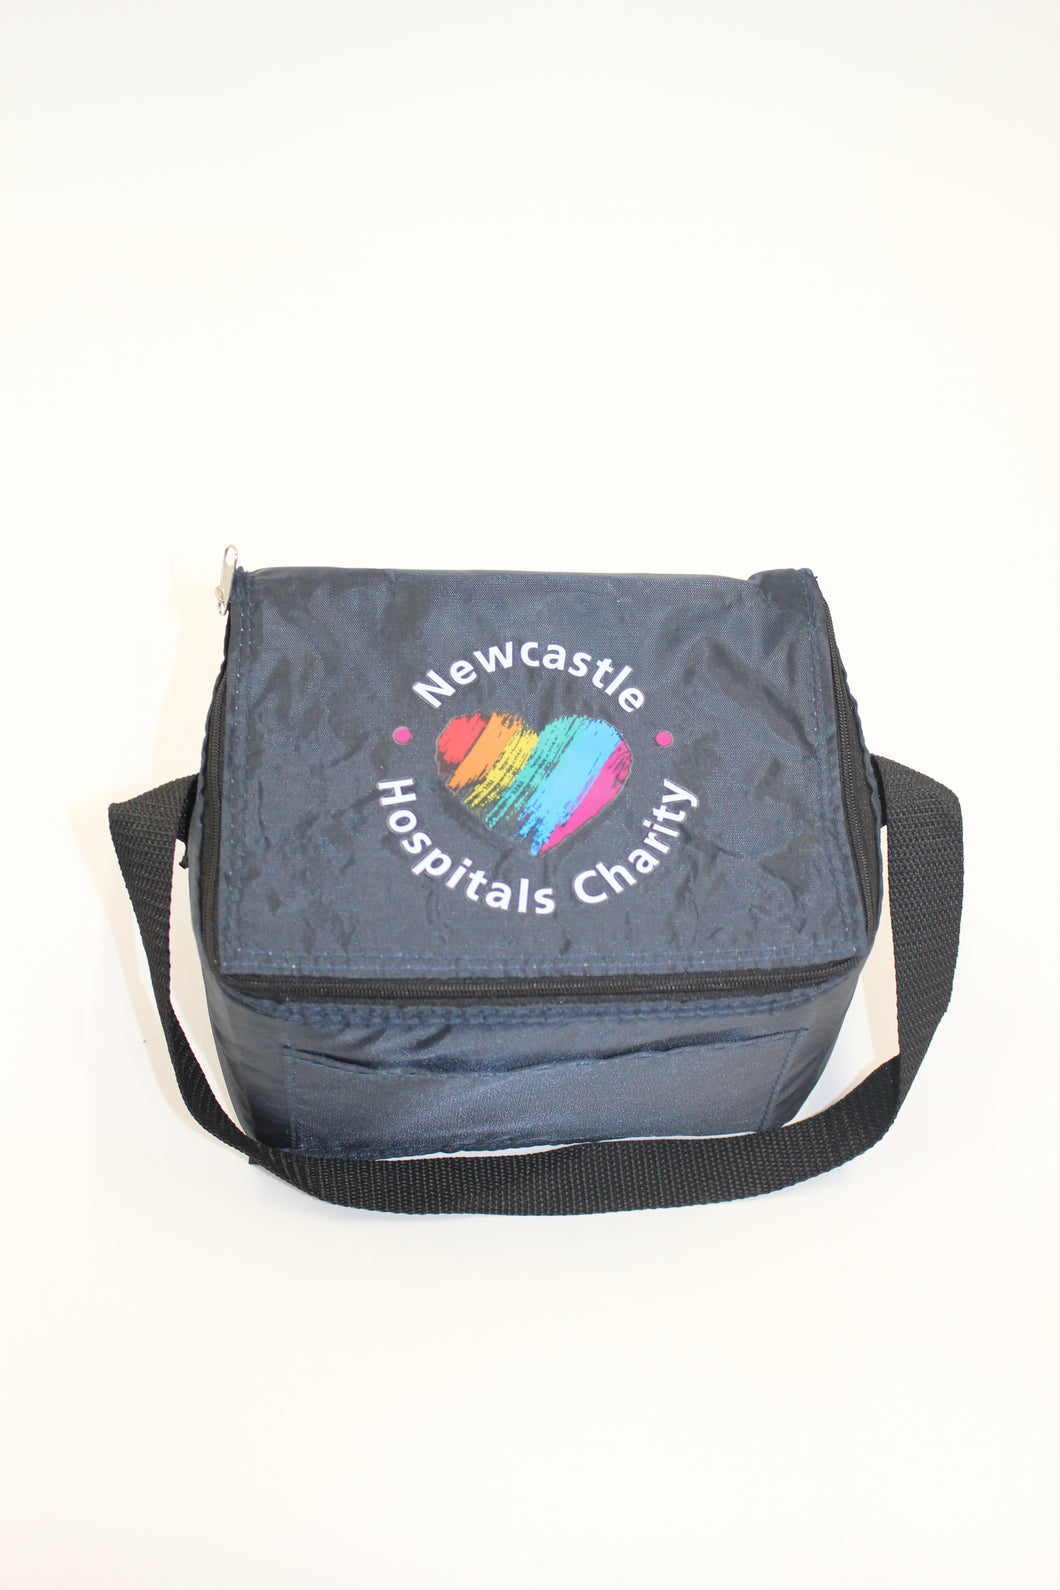 Newcastle Hospitals Charity Thermal lunch bag